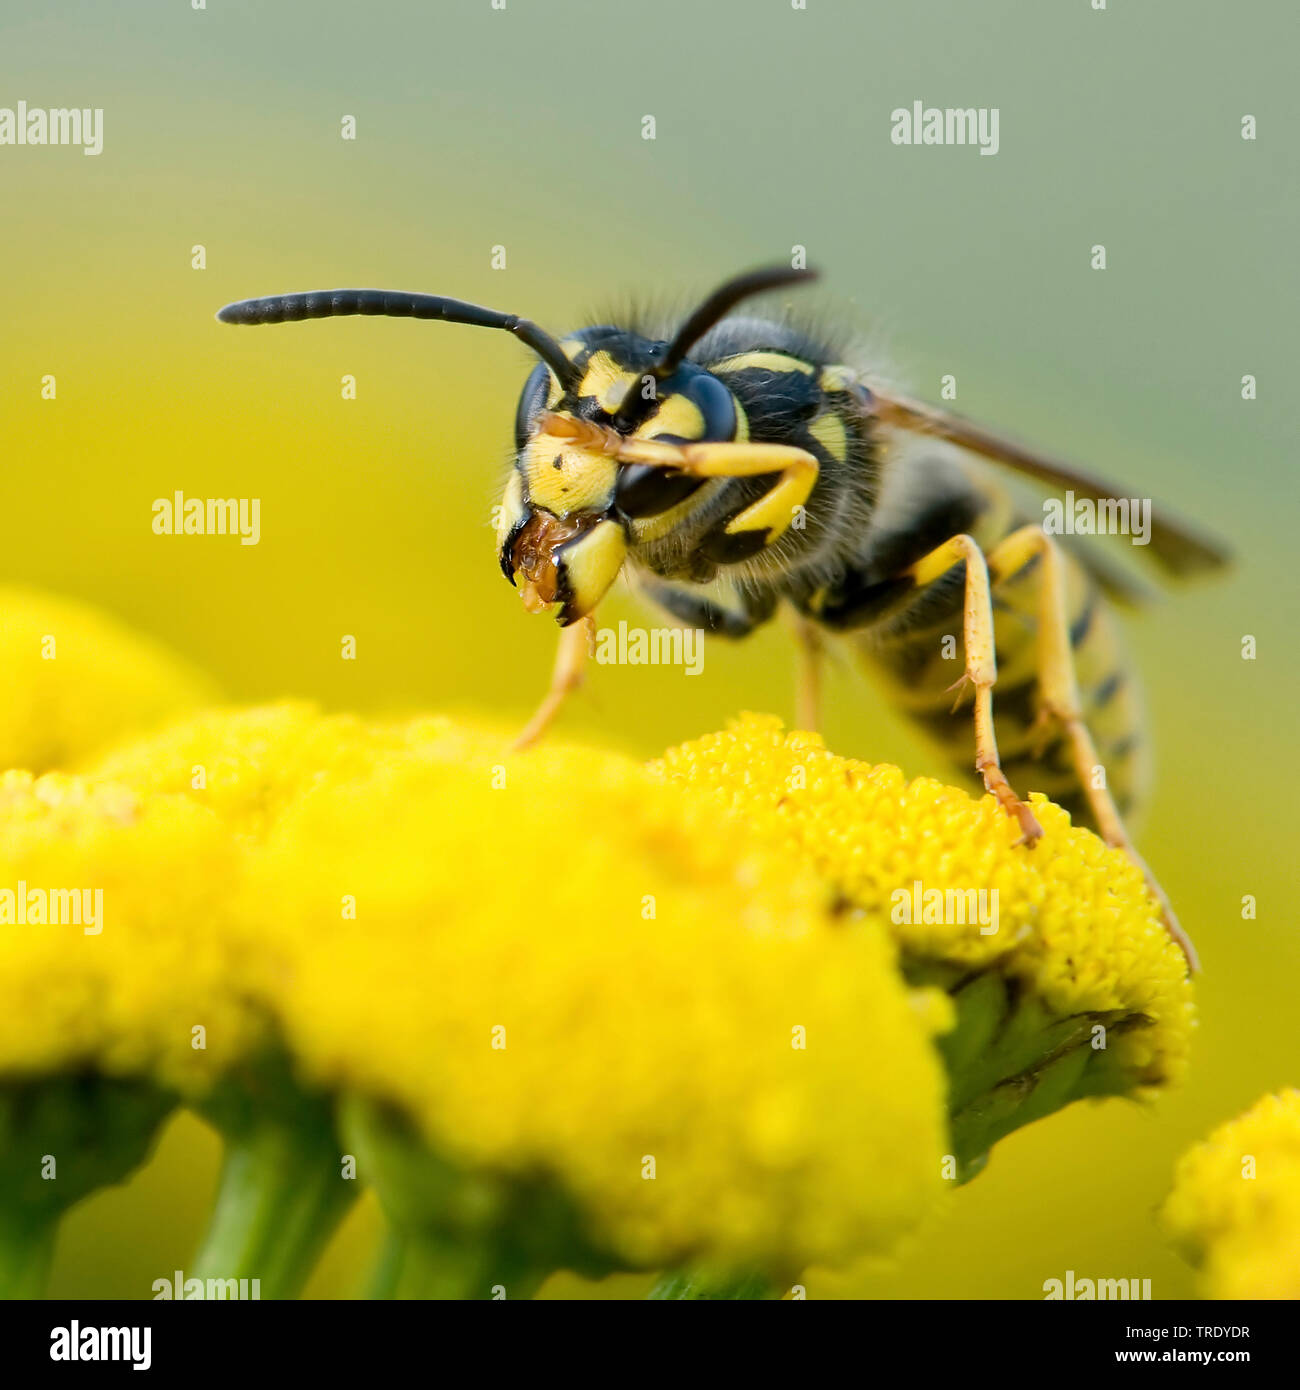 wasp on yellow flower Stock Photo